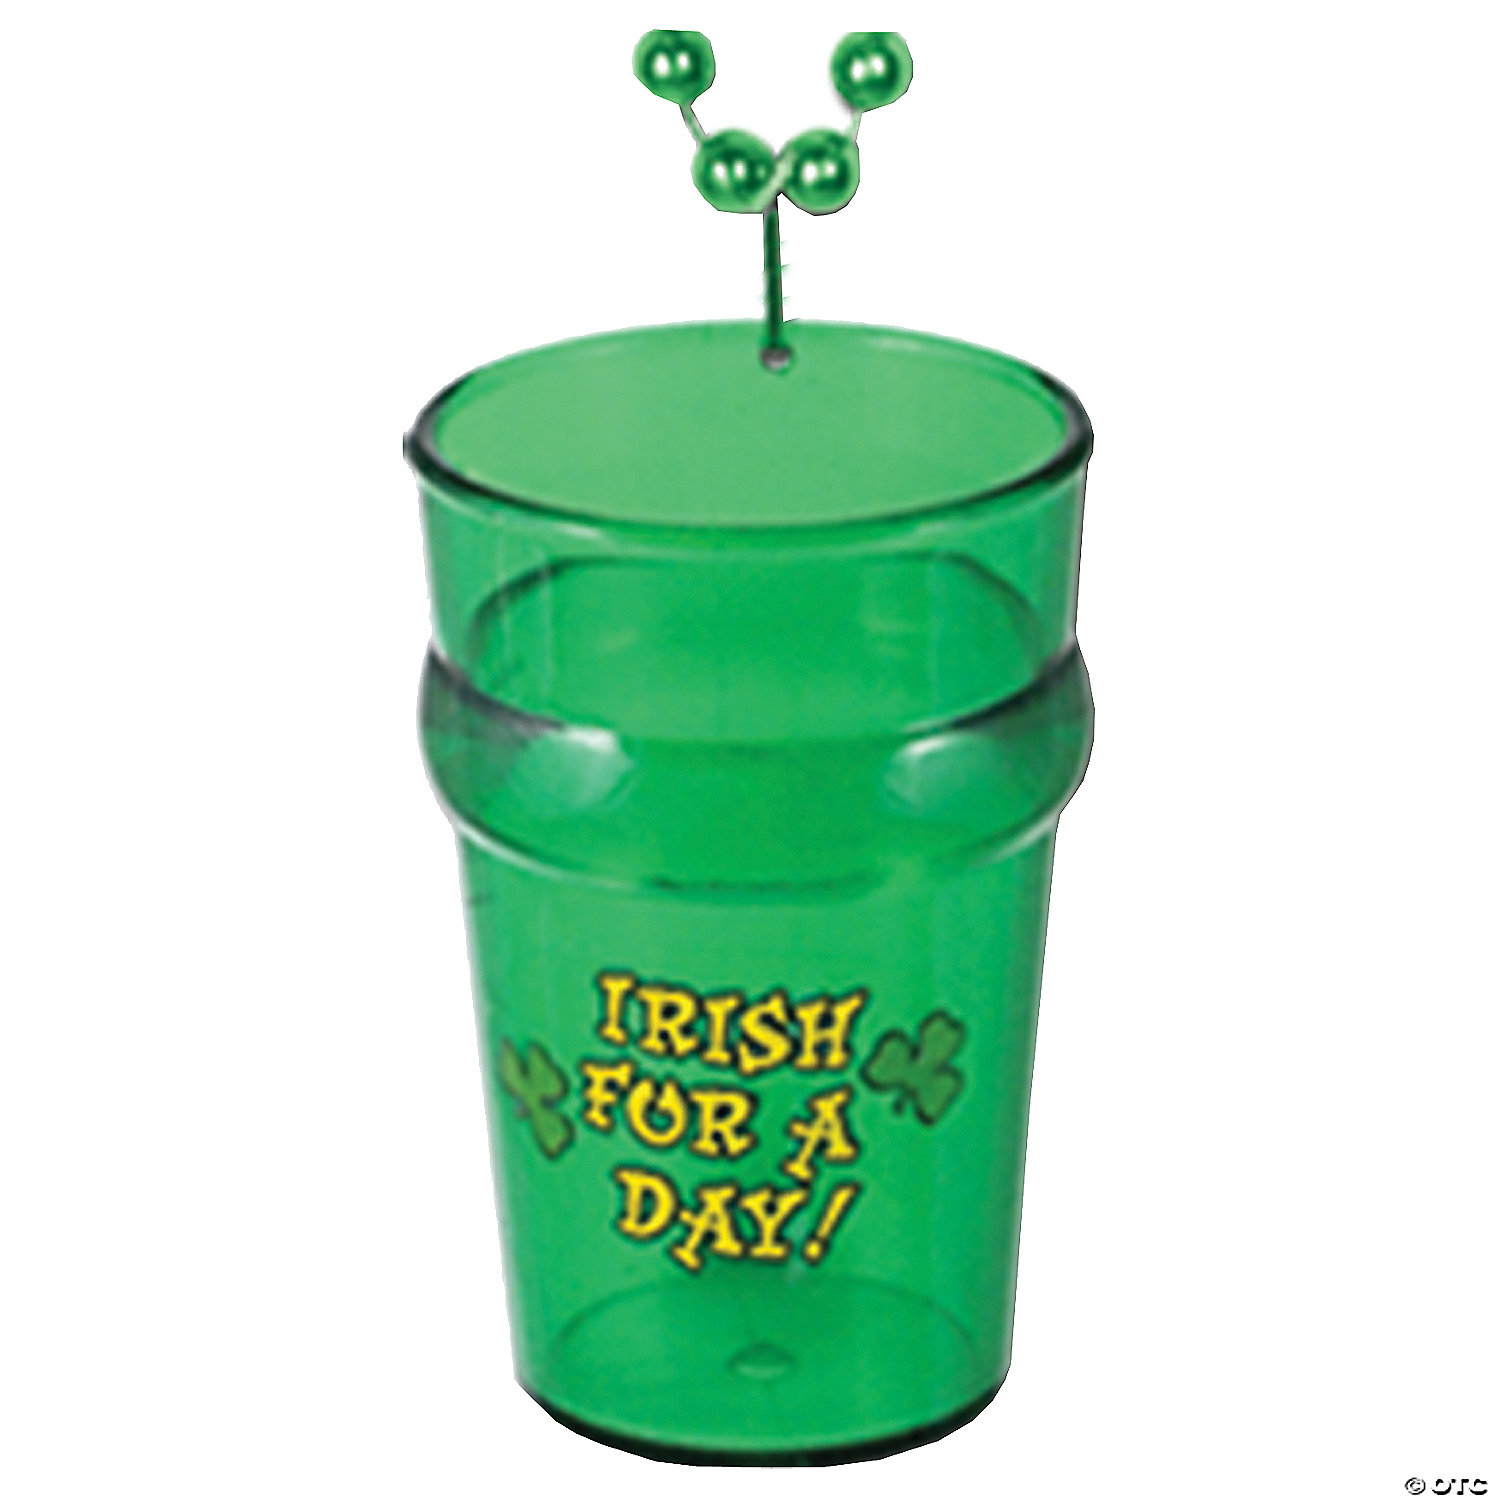 ST. PATRICK'S DAY GLASS WITH BEADS - ST. PATRICK'S DAY